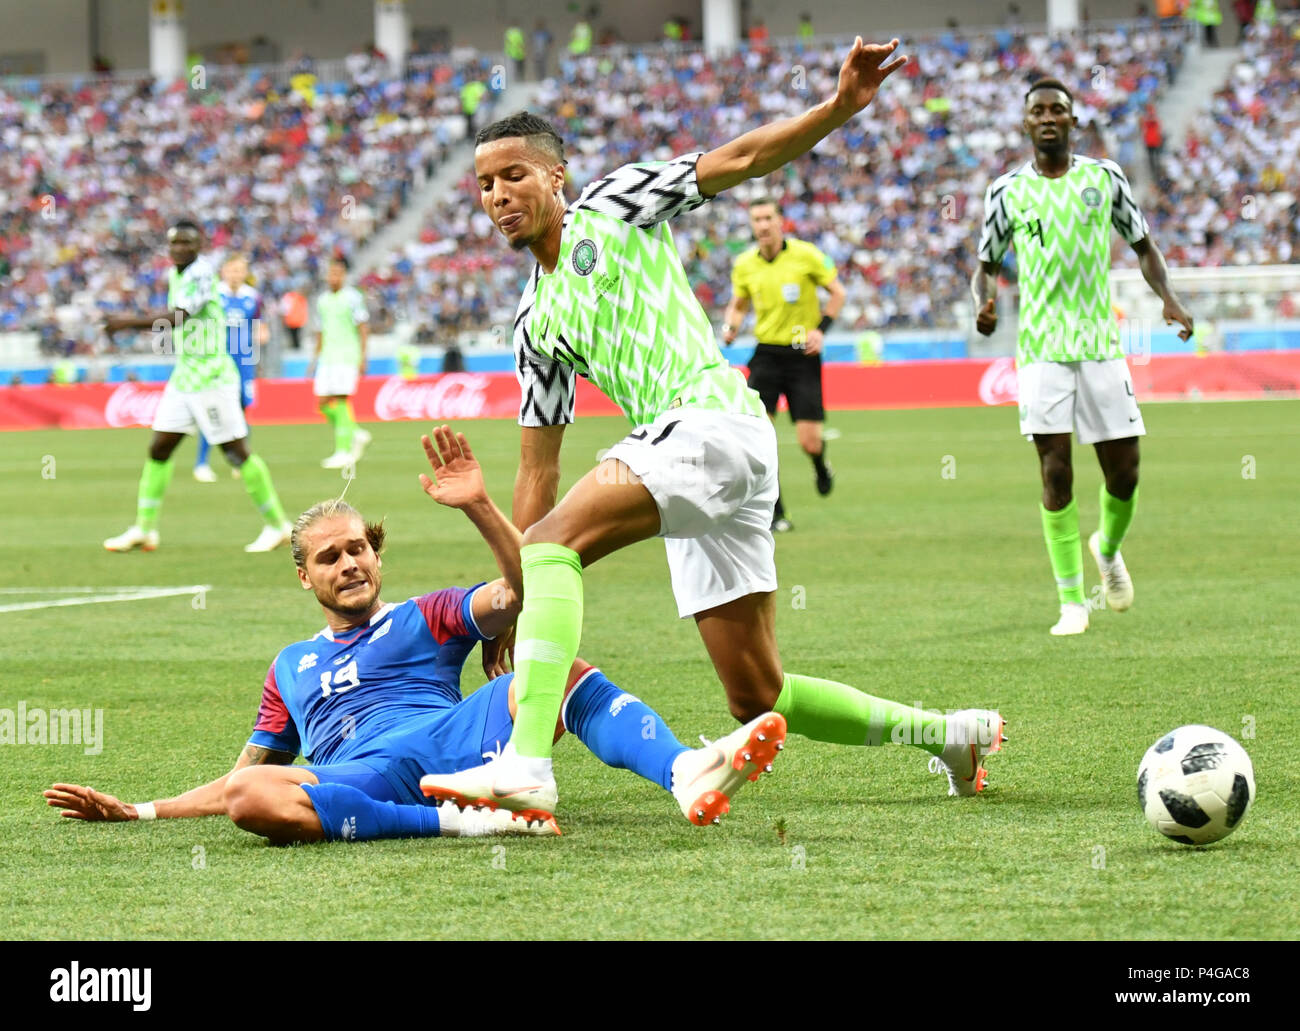 Volgograd, Russia. 22nd June, 2018. Tyronne Ebuehi (R front) of Nigeria vies with Rurik Gislason (L front) of Iceland during the 2018 FIFA World Cup Group D match between Nigeria and Iceland in Volgograd, Russia, June 22, 2018. Nigeria won 2-0. Credit: Lui Siu Wai/Xinhua/Alamy Live News Stock Photo